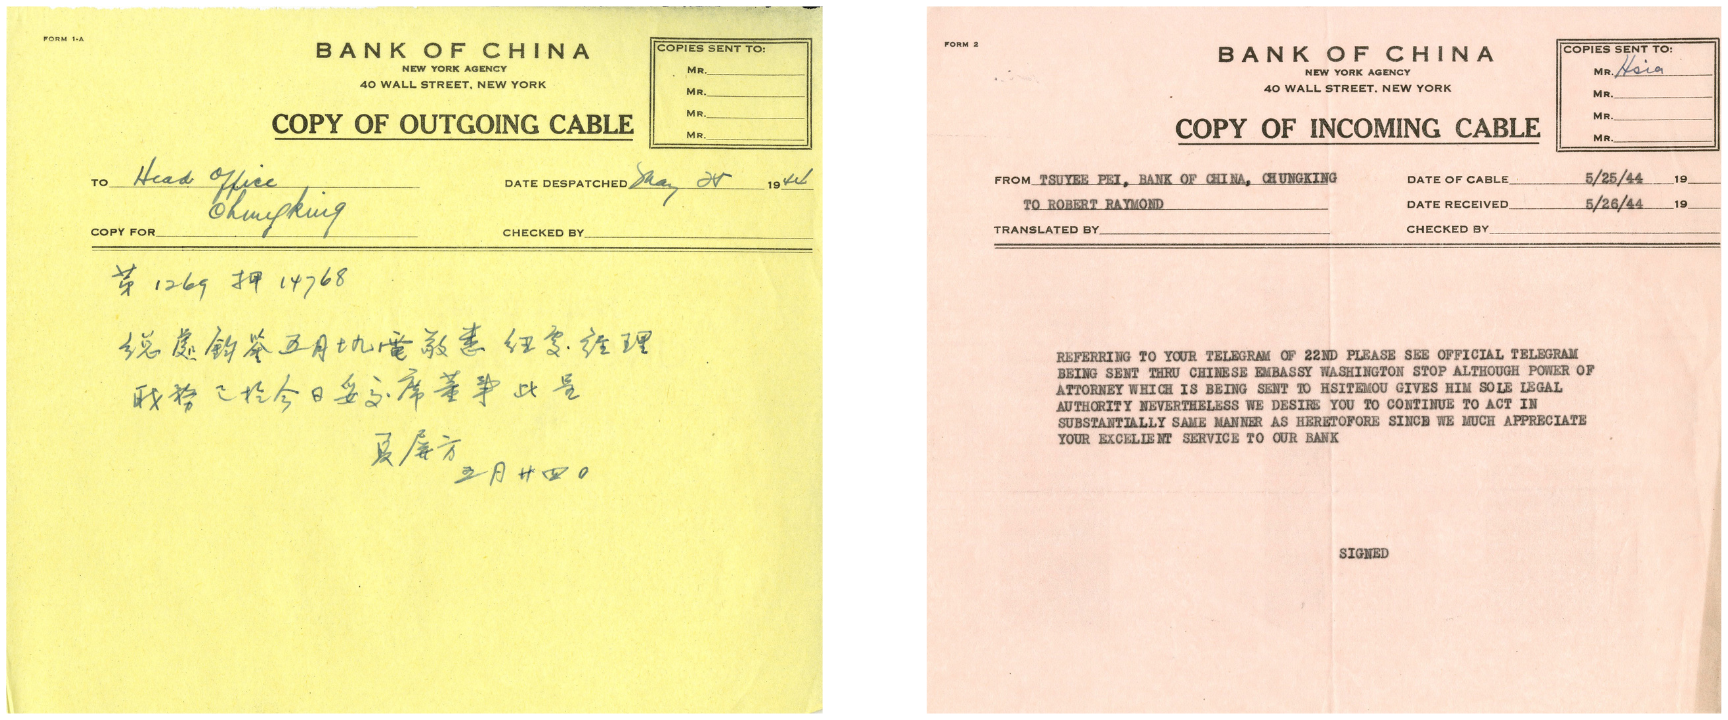 Two outgoing cable messages from the Bank of China. One is in Chinese and the other is a copy in English.